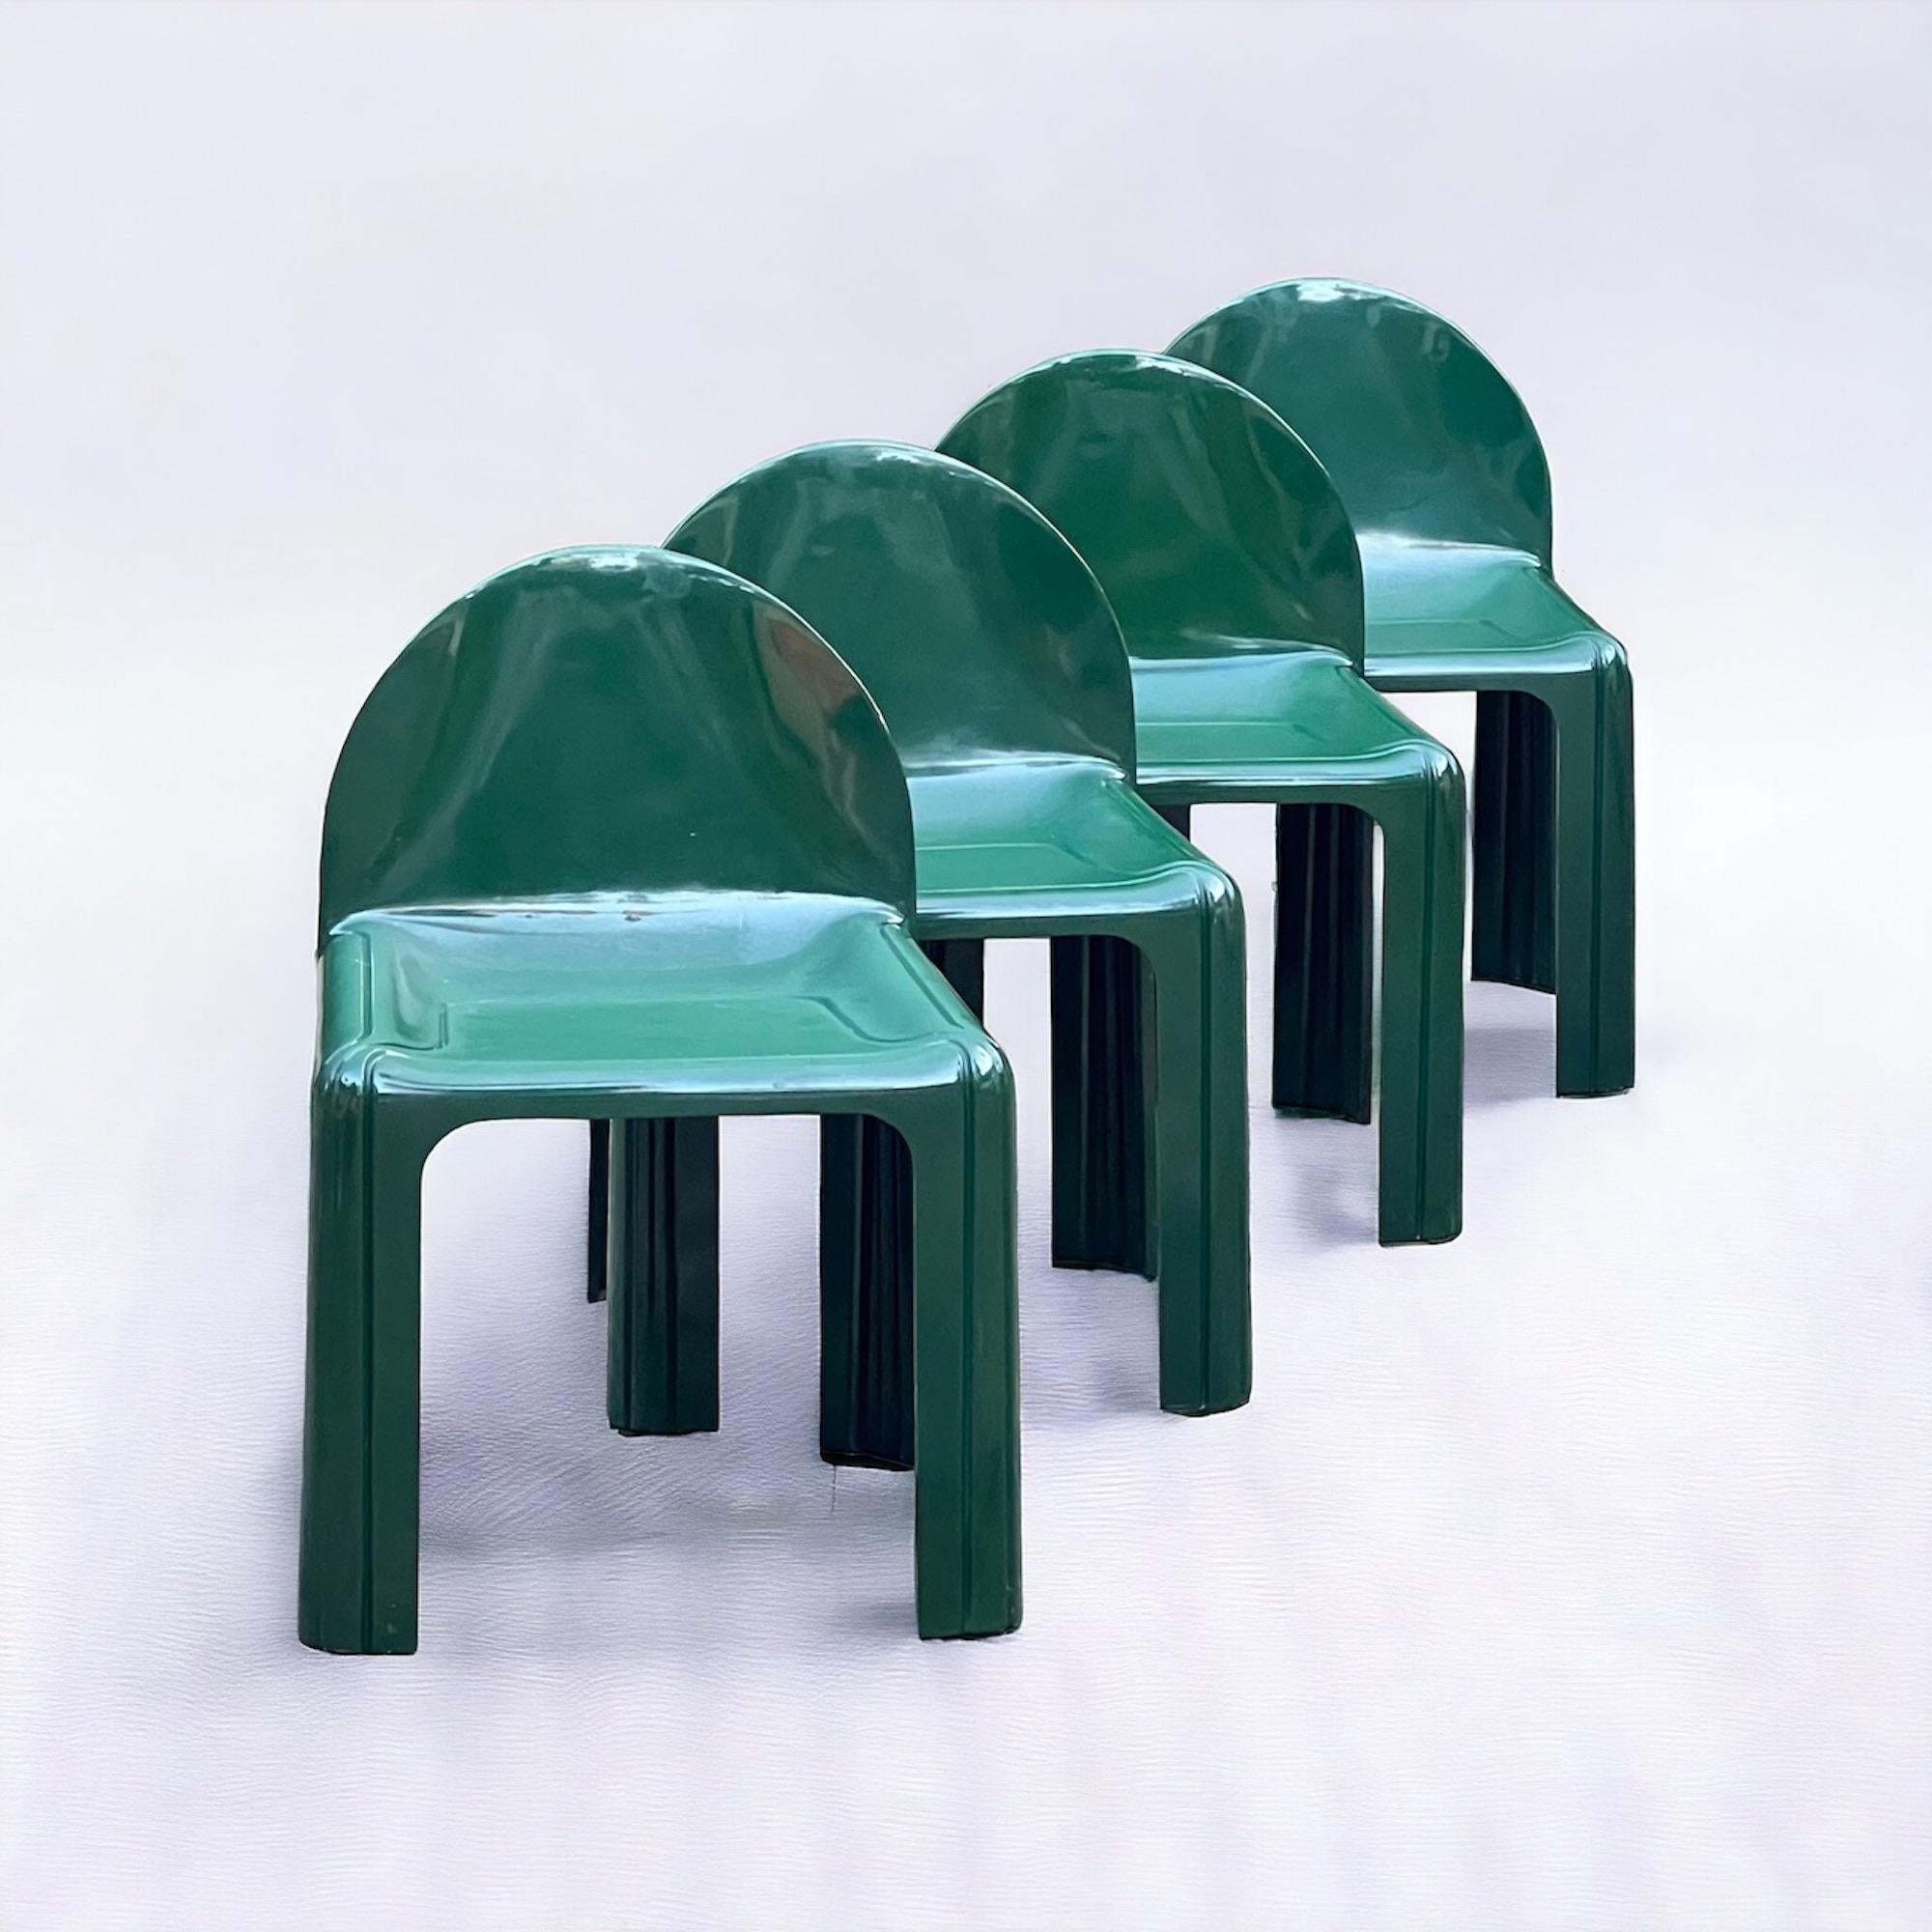 Mid-20th Century Kartell Model 4854 Chairs by Gae Aulenti, 1960s - Set of 4 - Emerald Green Resin For Sale